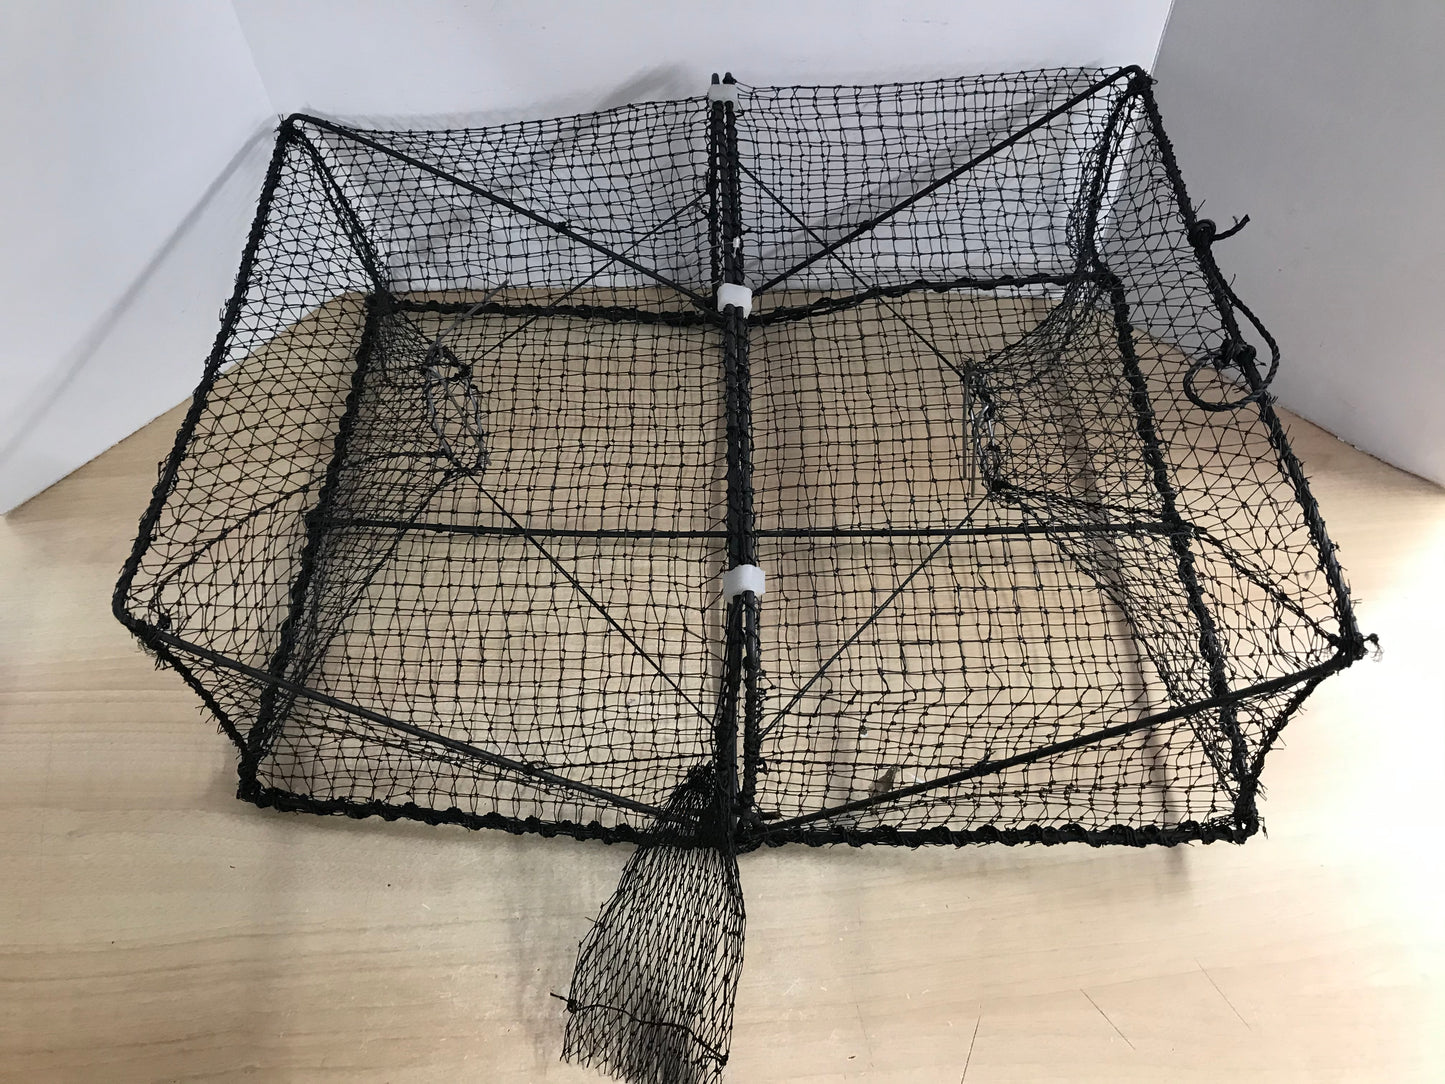 Fishing Adventures Shrimp Prawn Trap New With Tag Measures 18 x 8 x 23